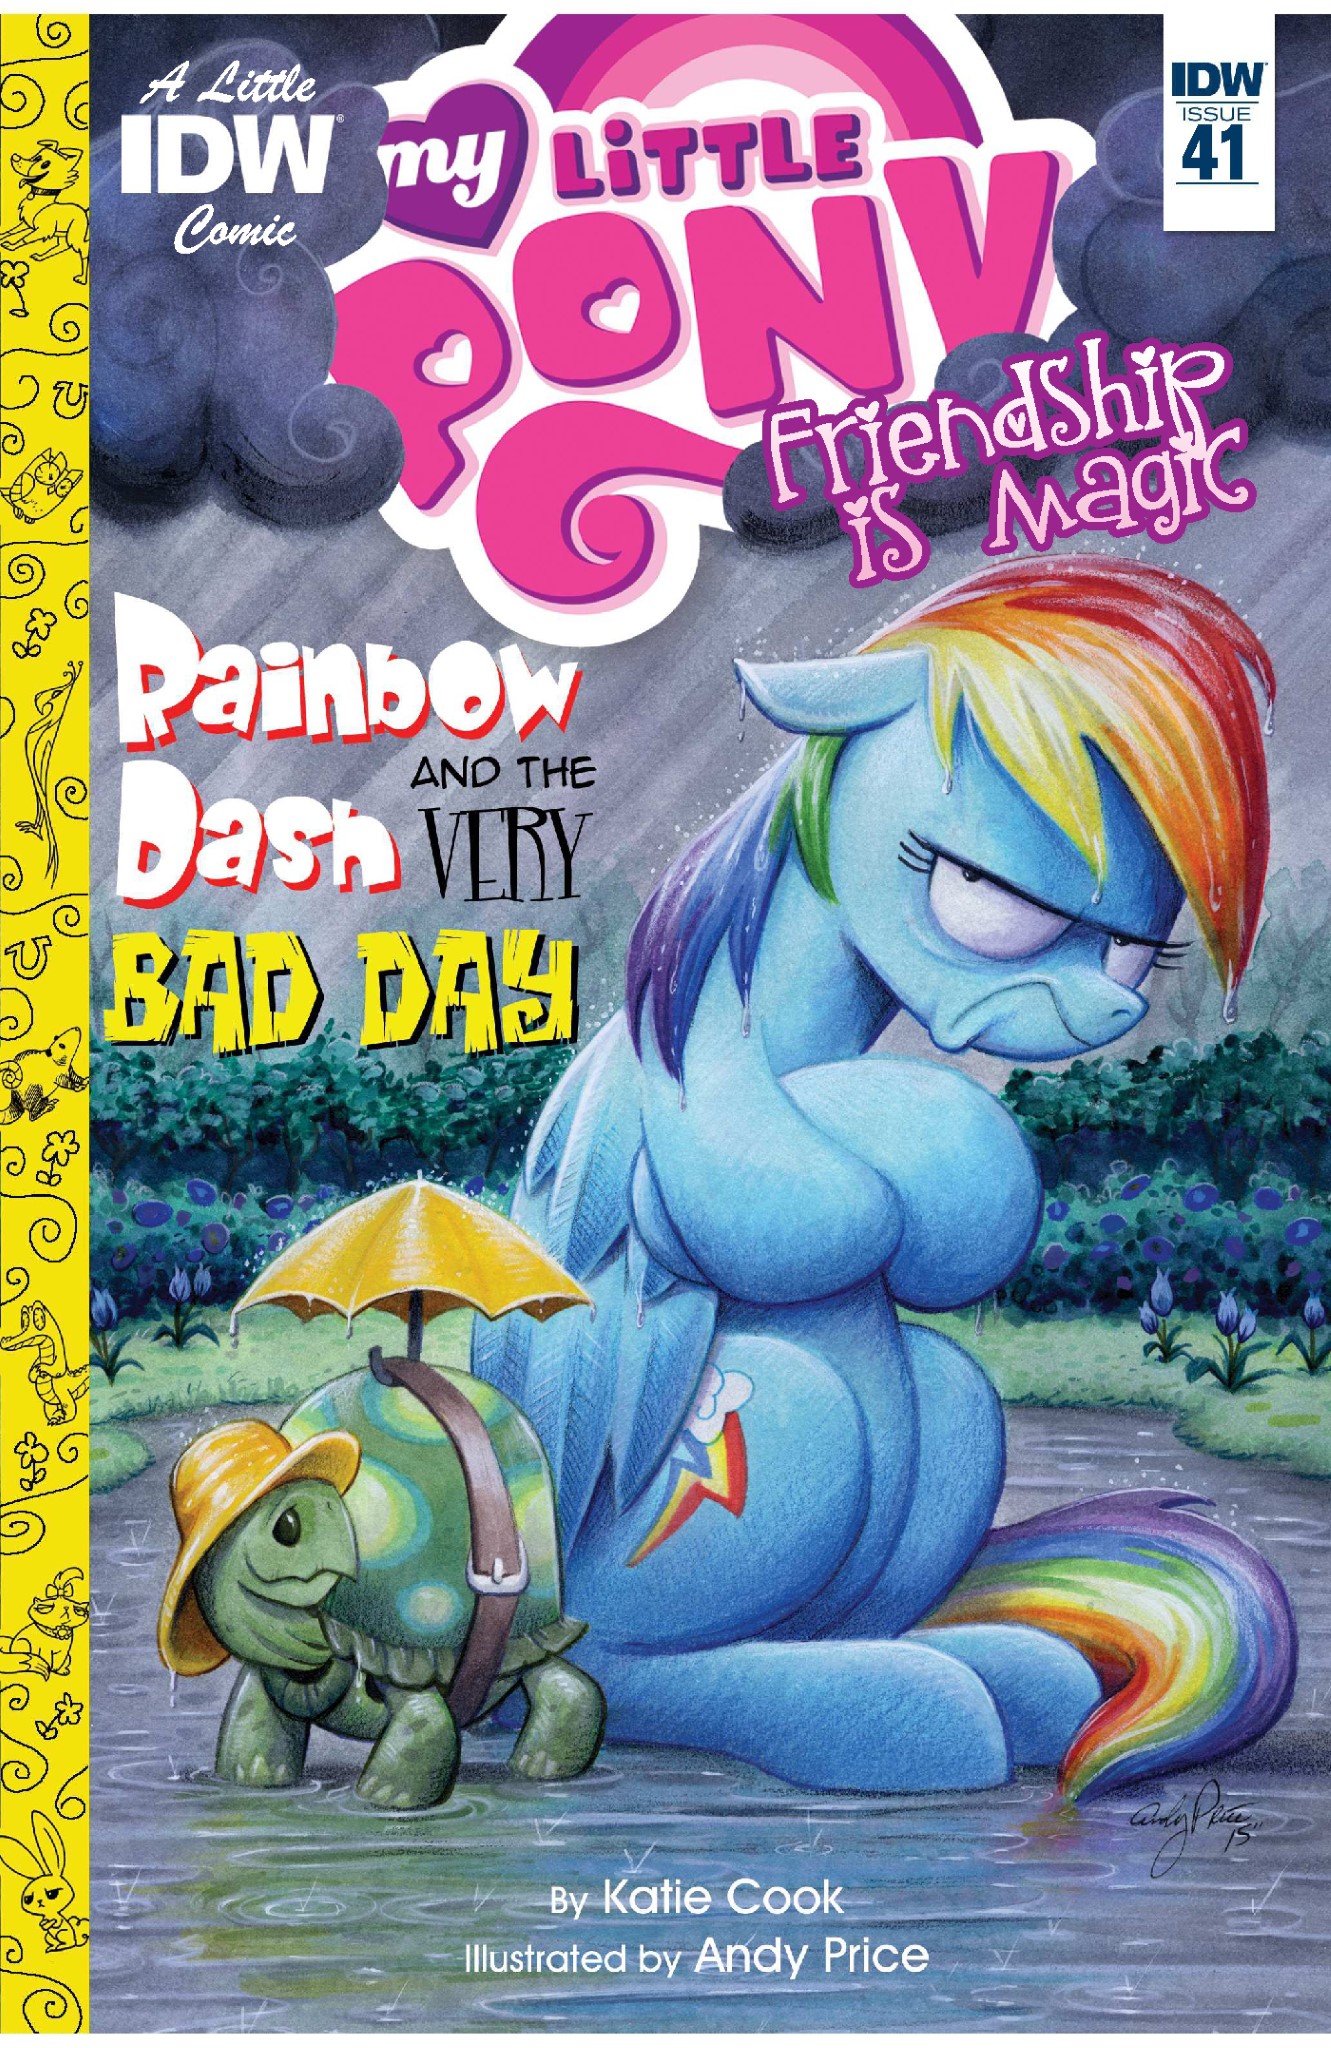 Read online My Little Pony: Friendship is Magic comic -  Issue #41 - 1